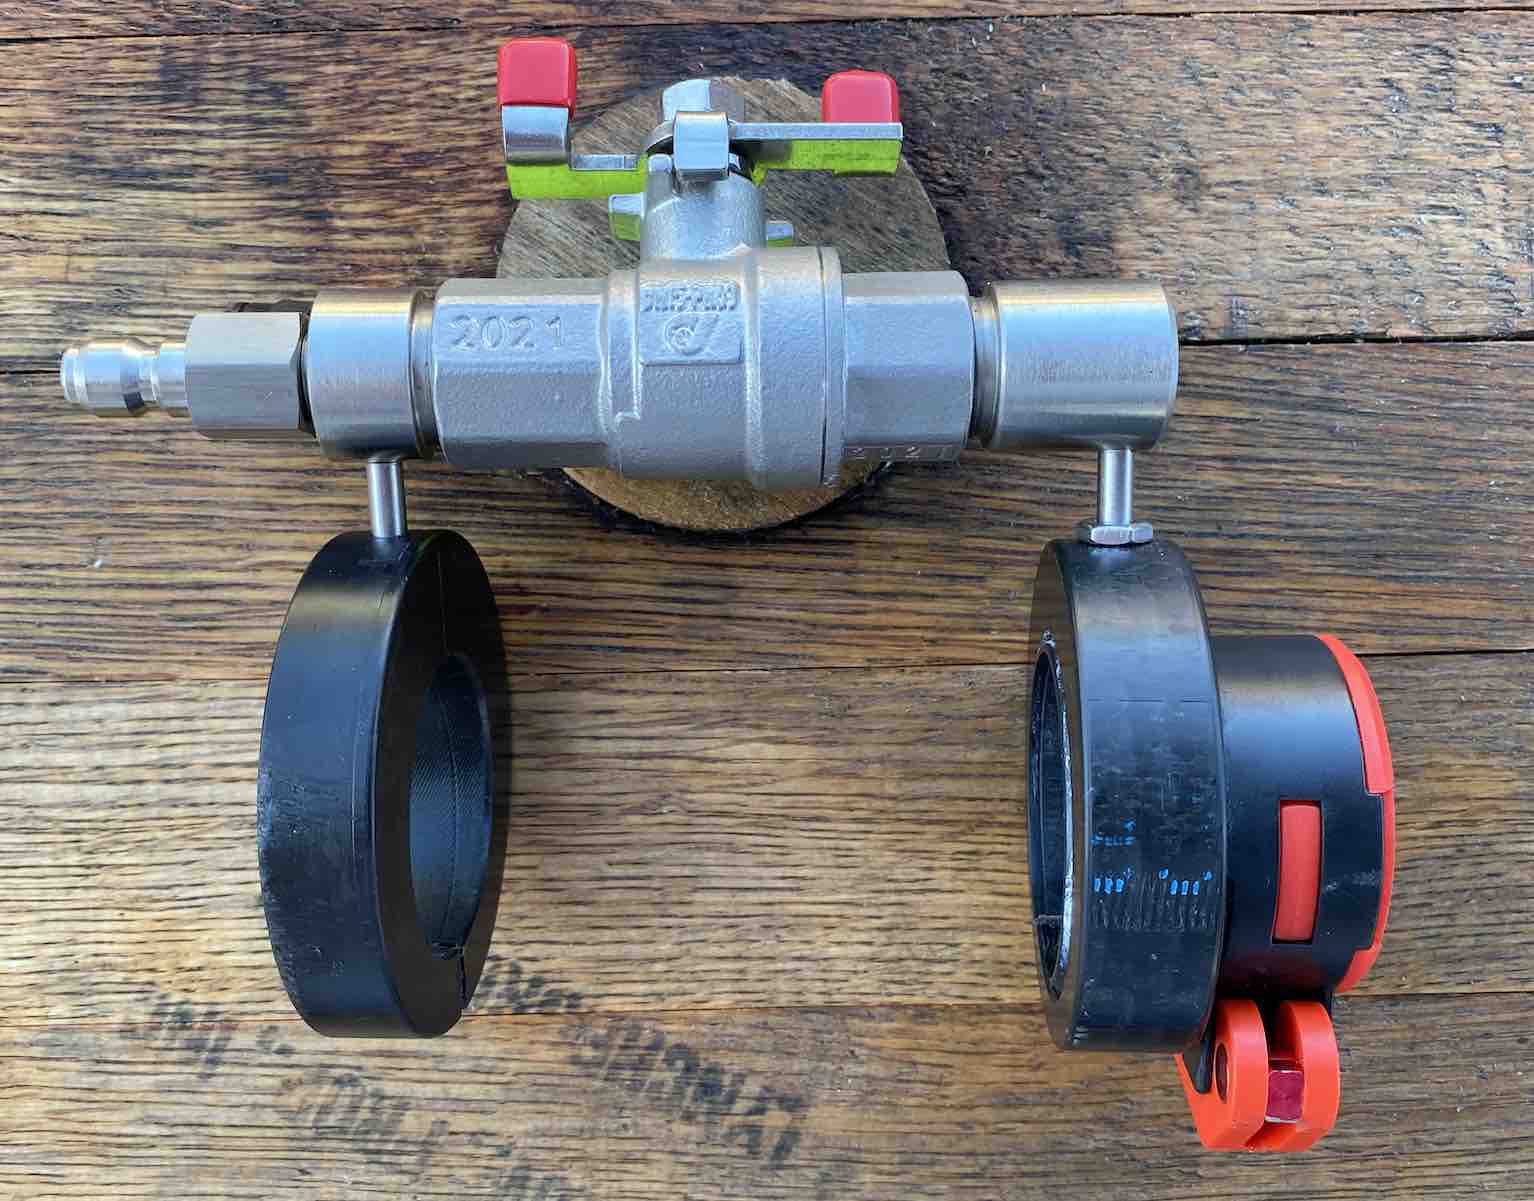 BENZ SLIDING WFP VALVE: Pole valve for applying softwash chemicals to roofs, and helps balance your pole at extended reach.